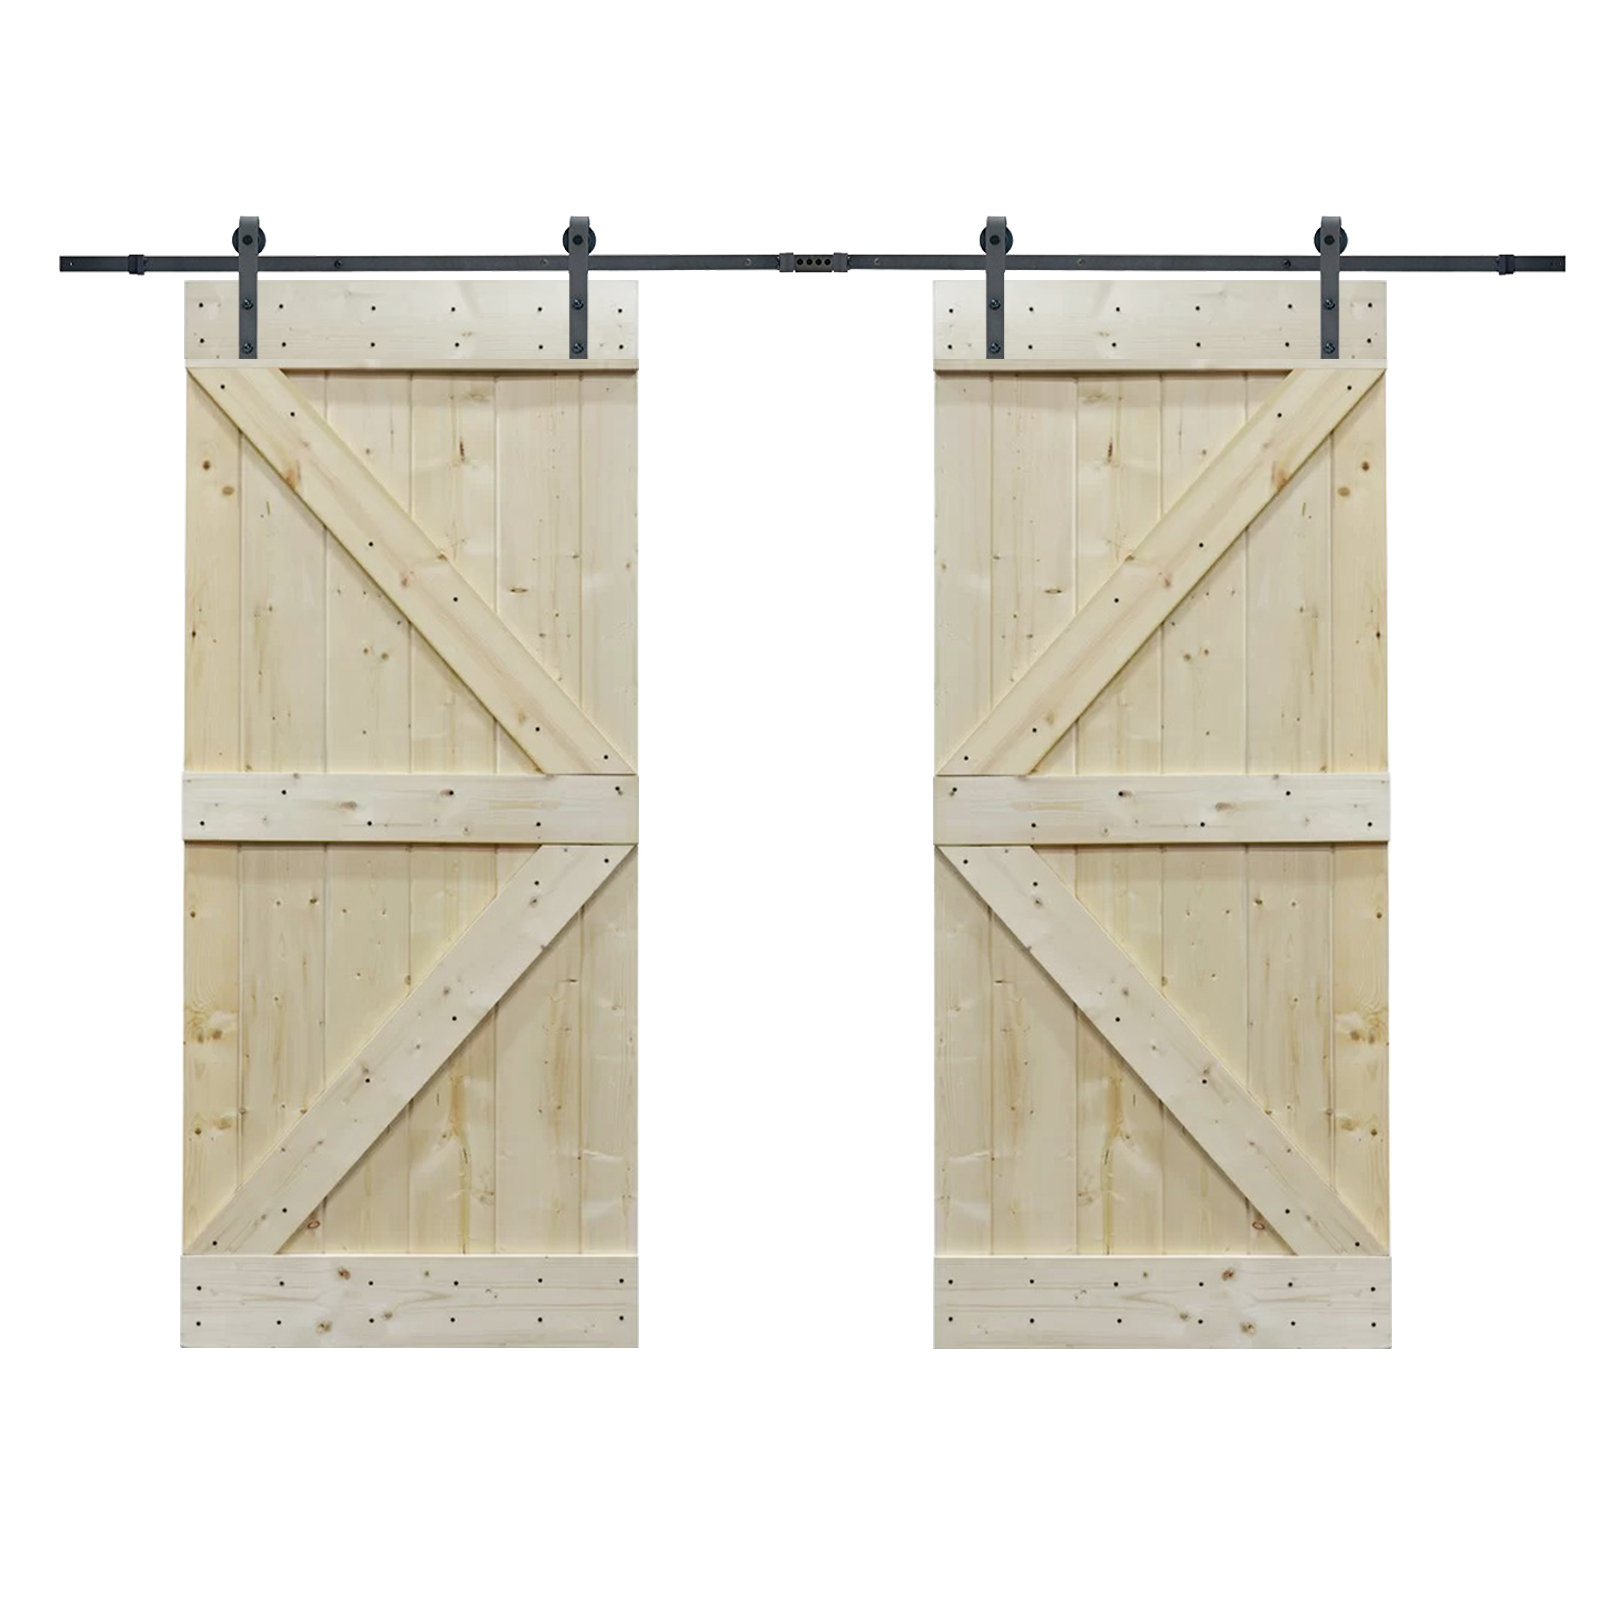 Calhome Paneled Wood Unfinished Knotty Barn Door With Installation